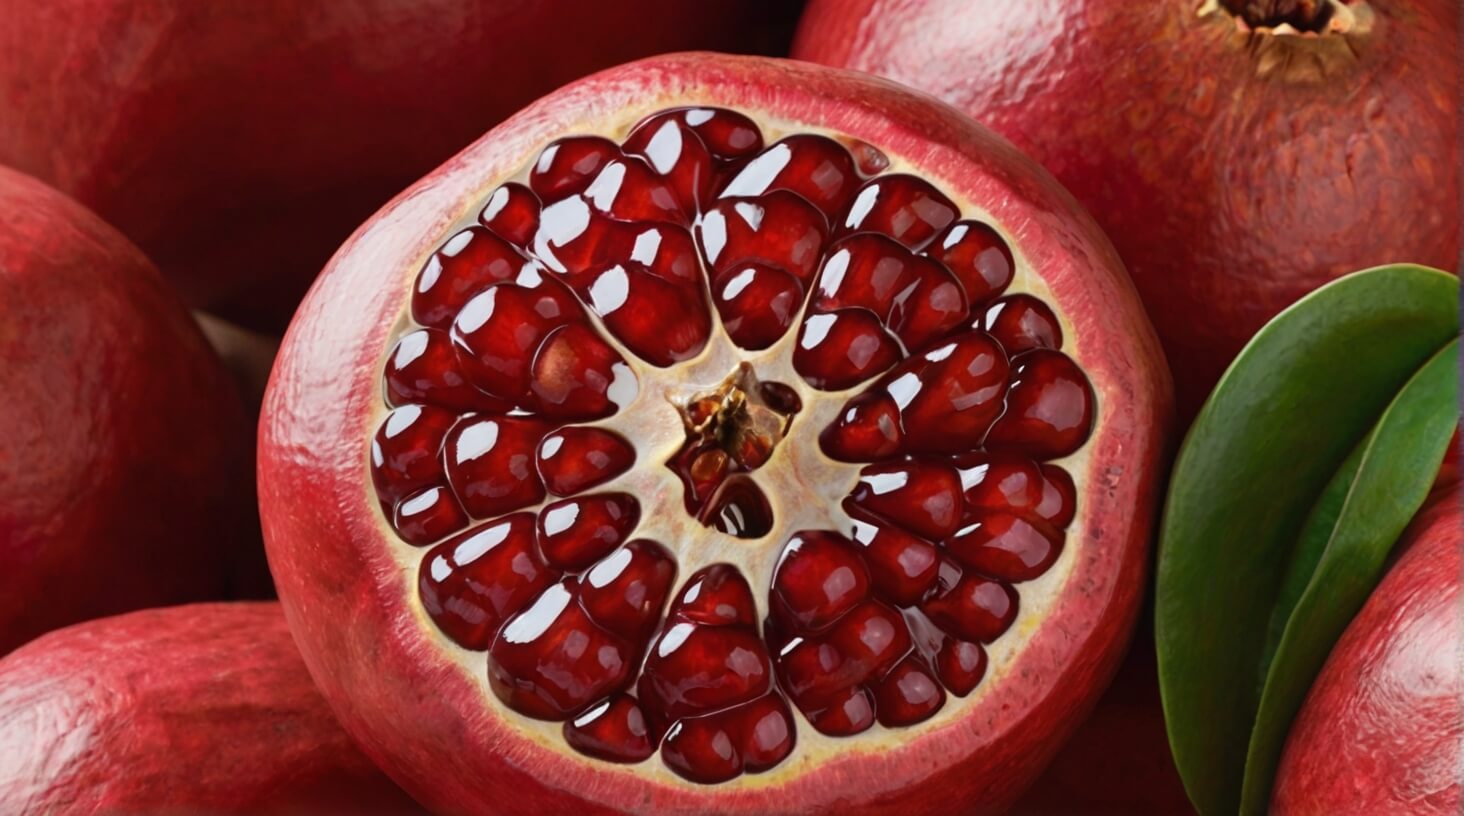 Close-up of vibrant pomegranate seeds surrounded by lush green leaves, symbolizing the health benefits and natural goodness of pomegranate extract.